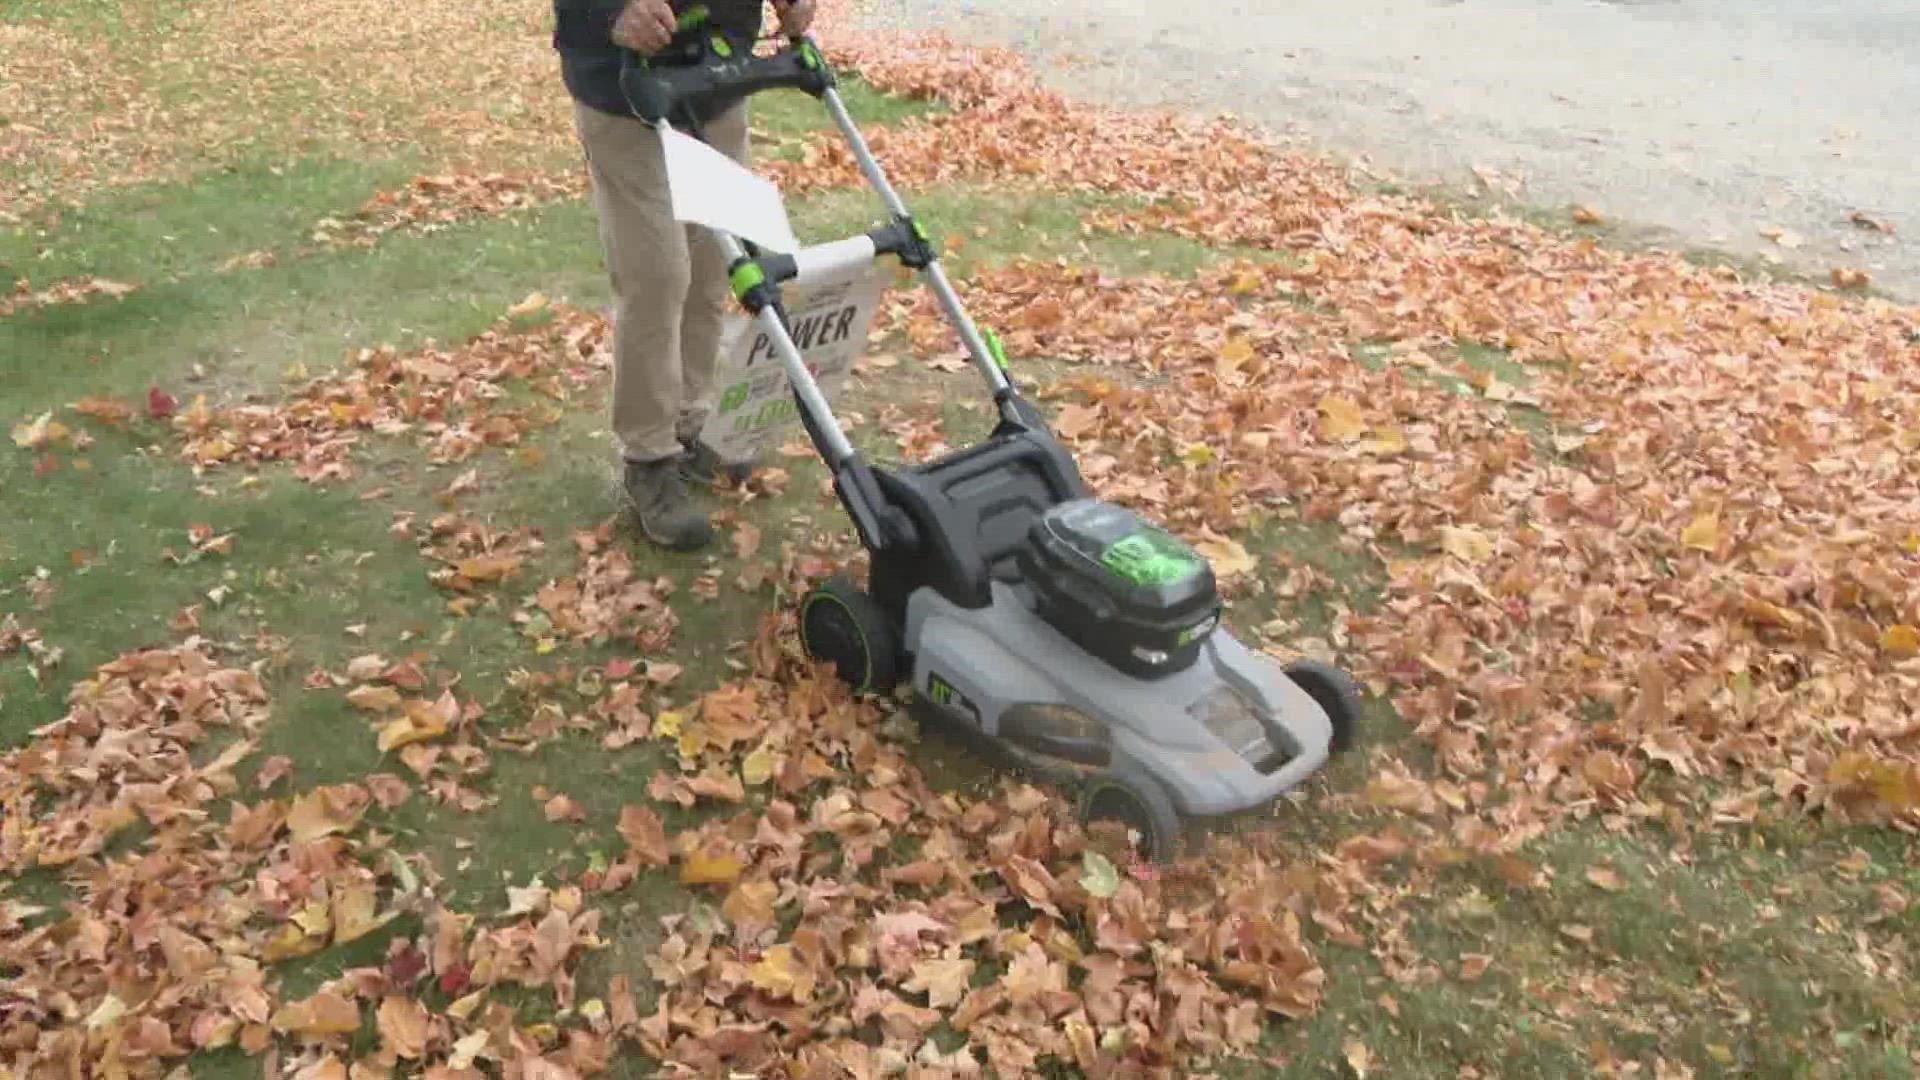 Raking, blowing, bagging or mulching, you should have a plan for this fall's leaves once they hit your yard.